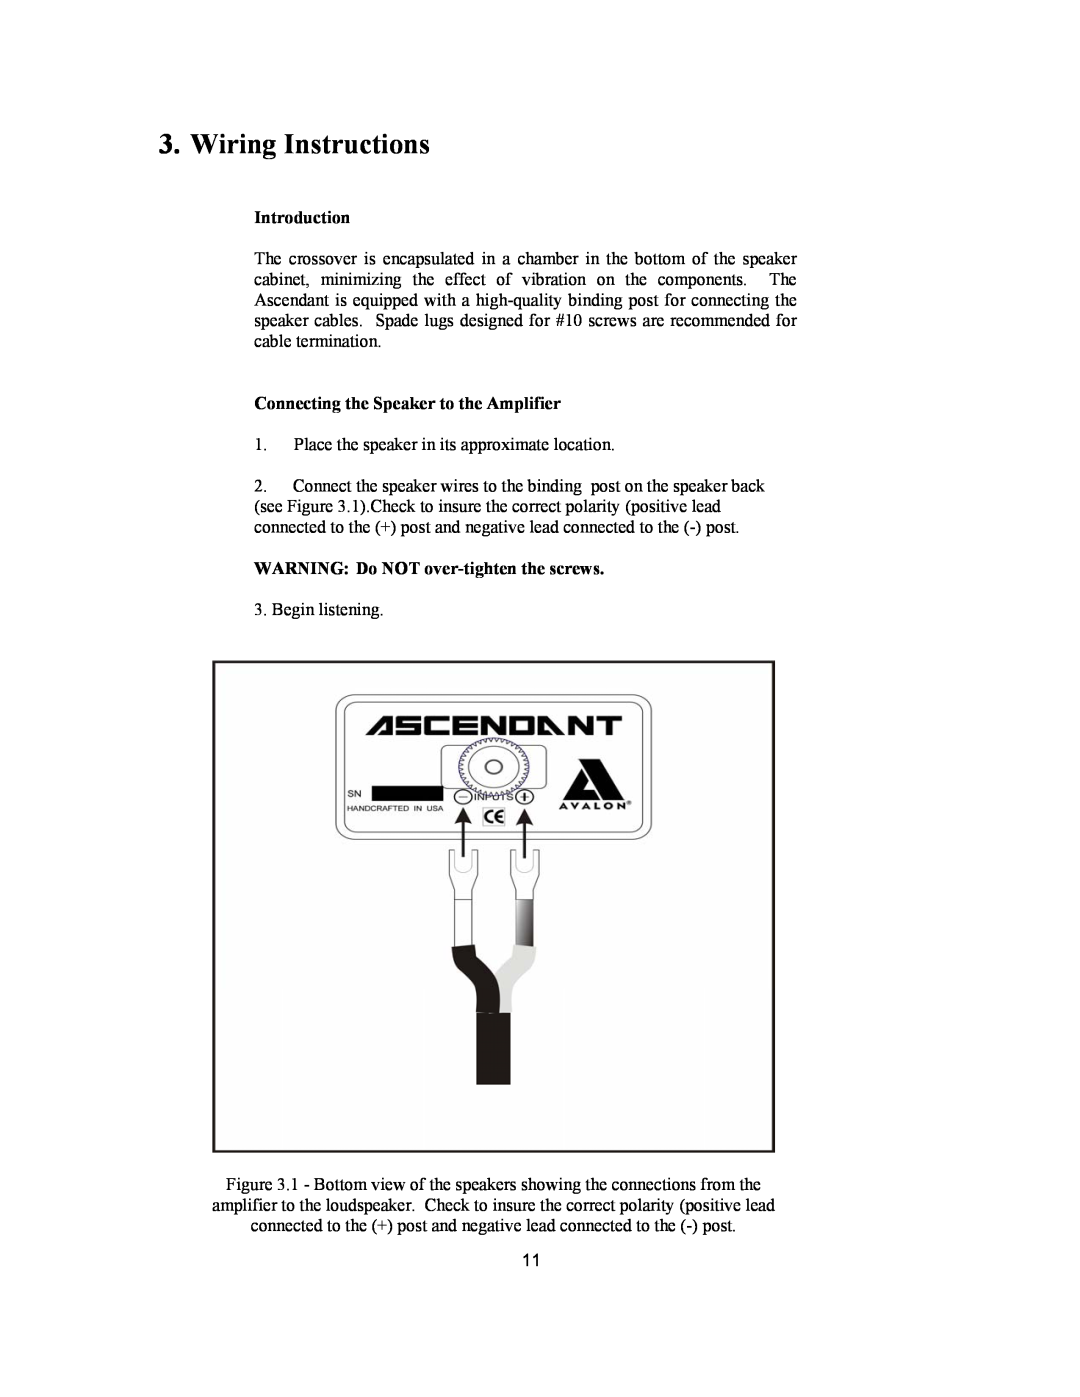 Avalon Acoustics AVALON ASCENDANT manual Wiring Instructions, Connecting the Speaker to the Amplifier, Introduction 